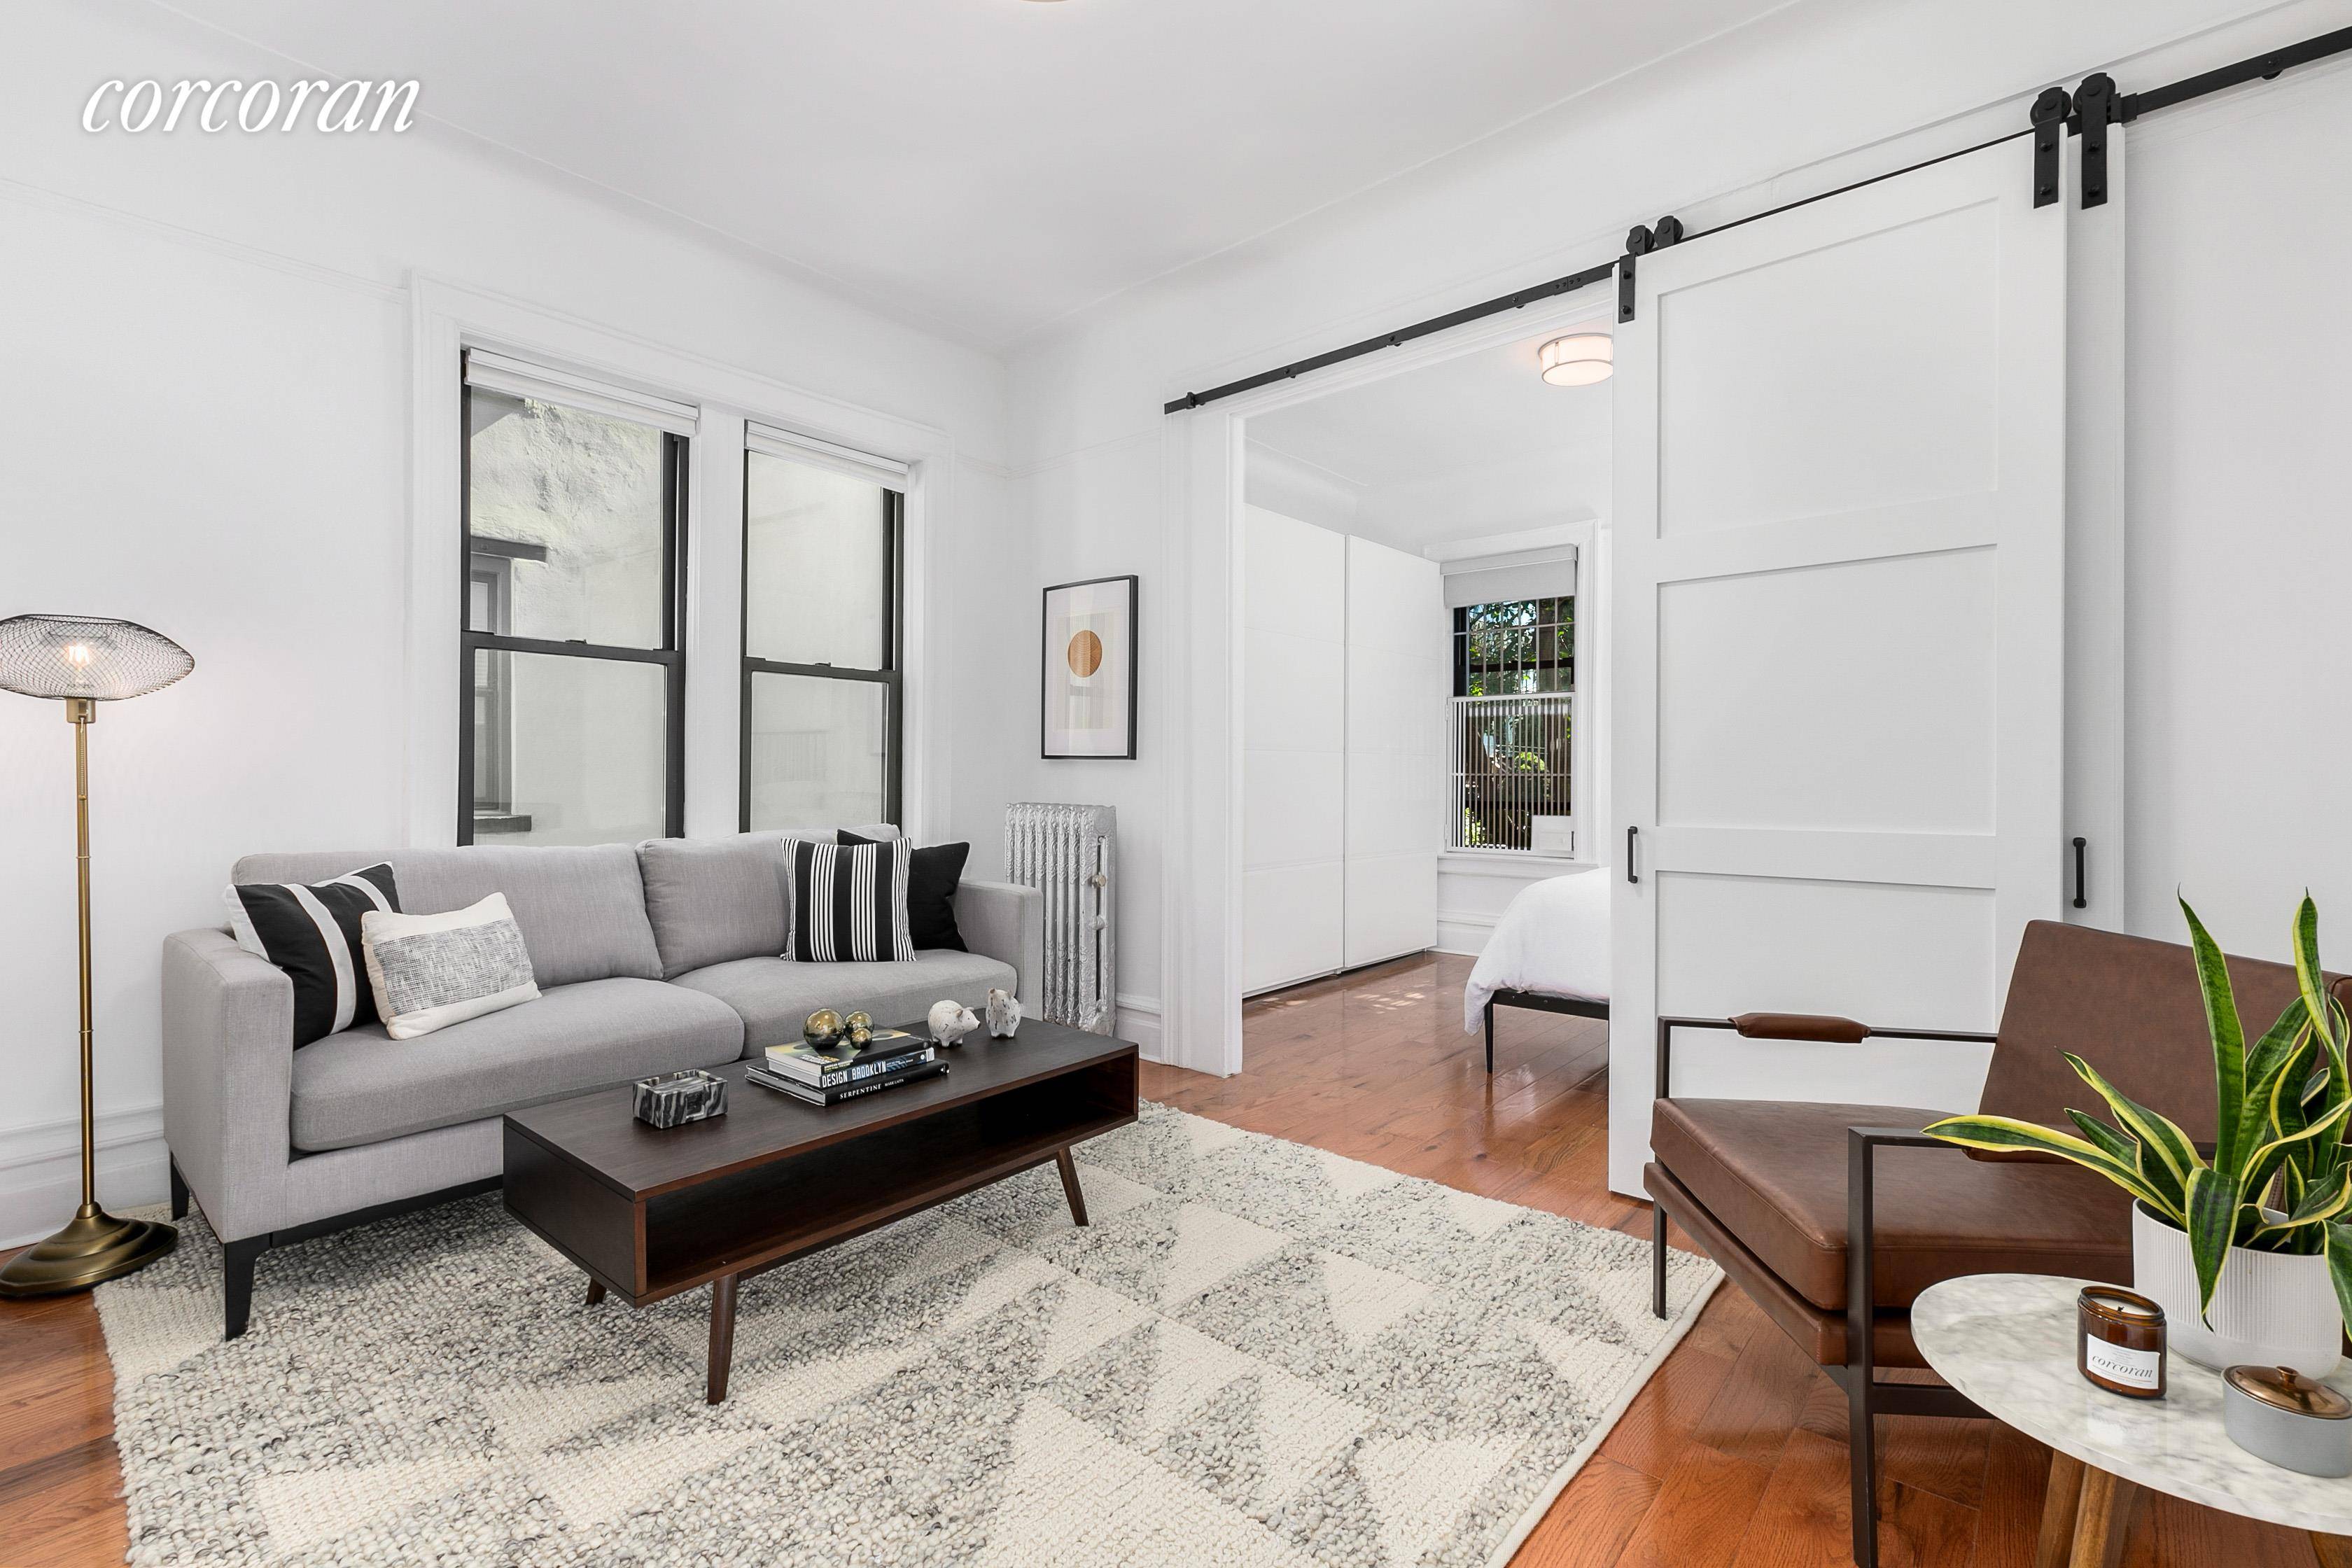 Welcome home to the sweetest two bedroom Coop in Prime Park Slope.